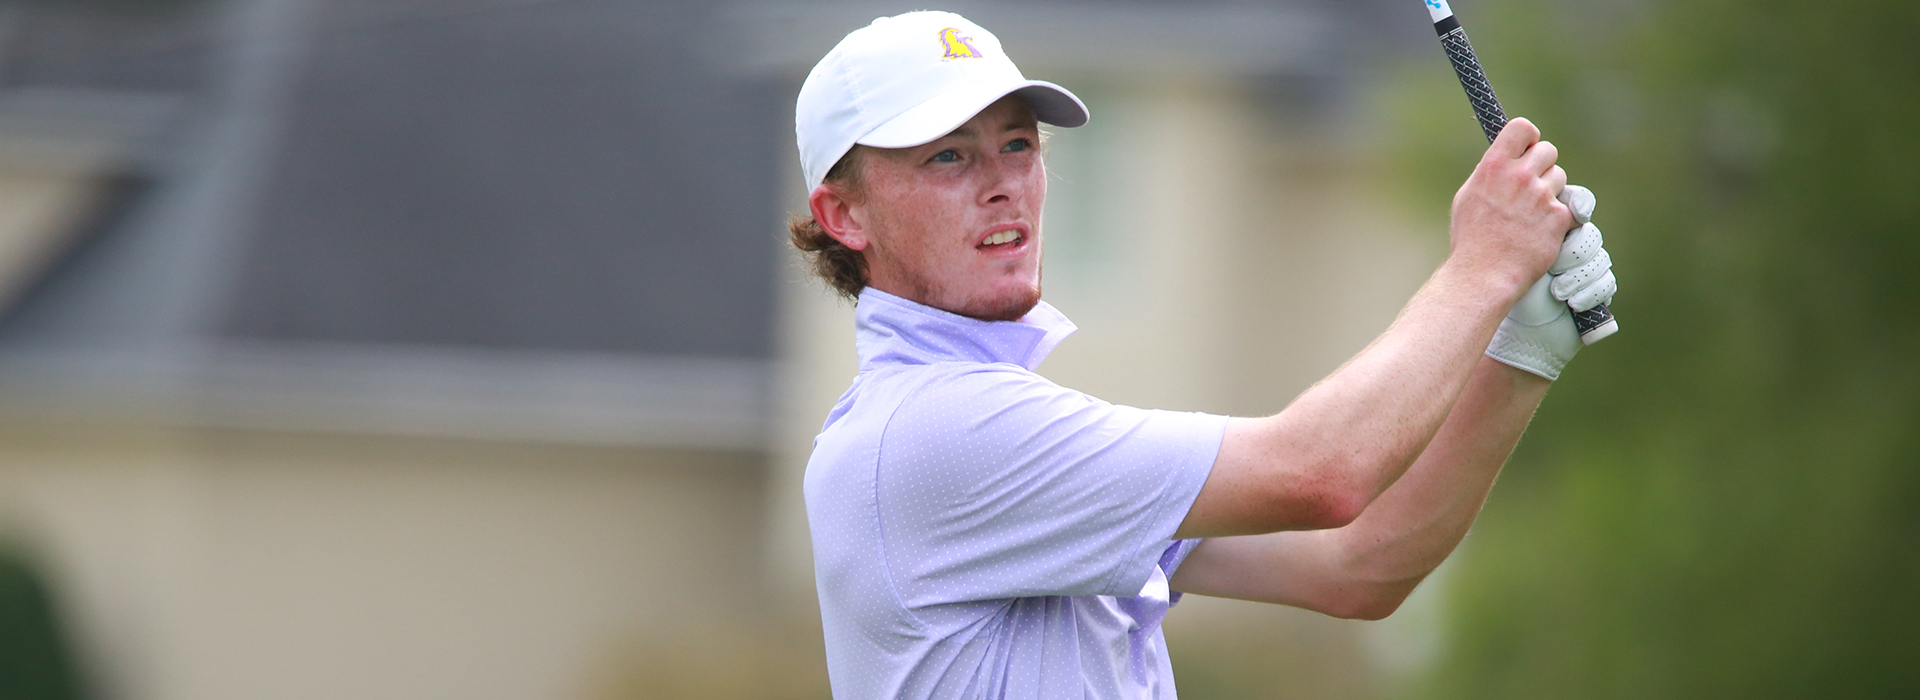 Skeen named OVC Male Golfer of the Week for first time